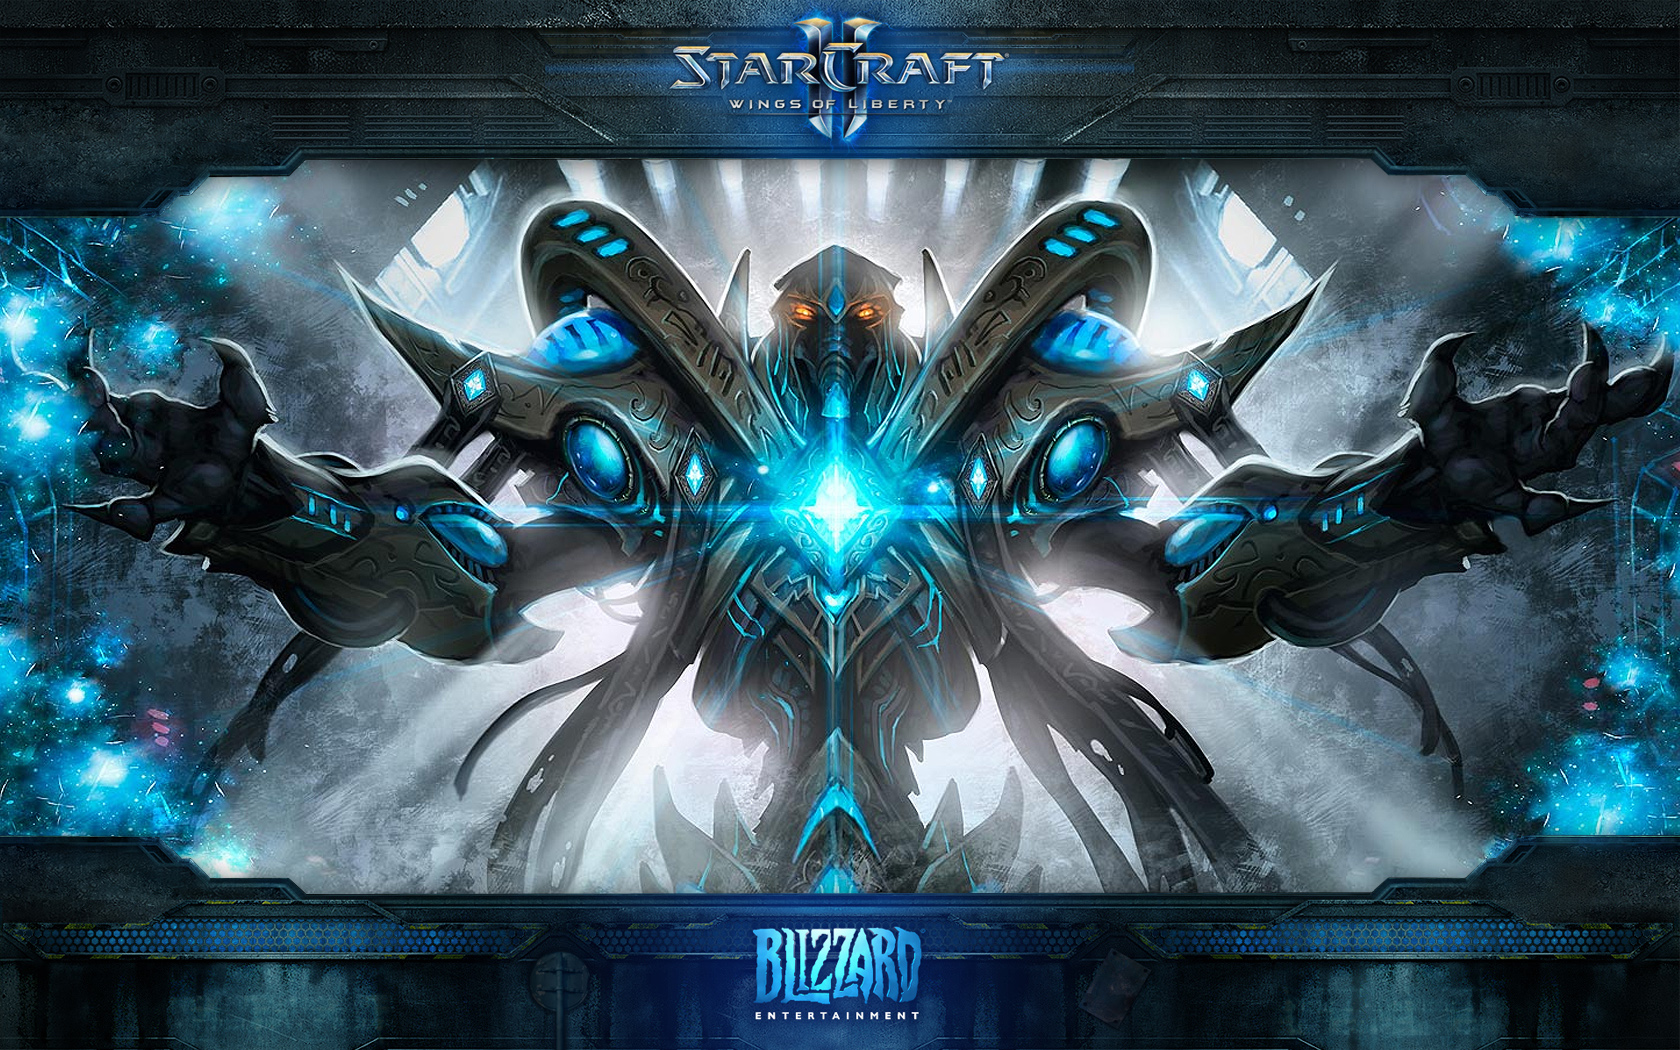 General 1680x1050 Starcraft II Protoss video games Blizzard Entertainment 2010 (Year) blue PC gaming